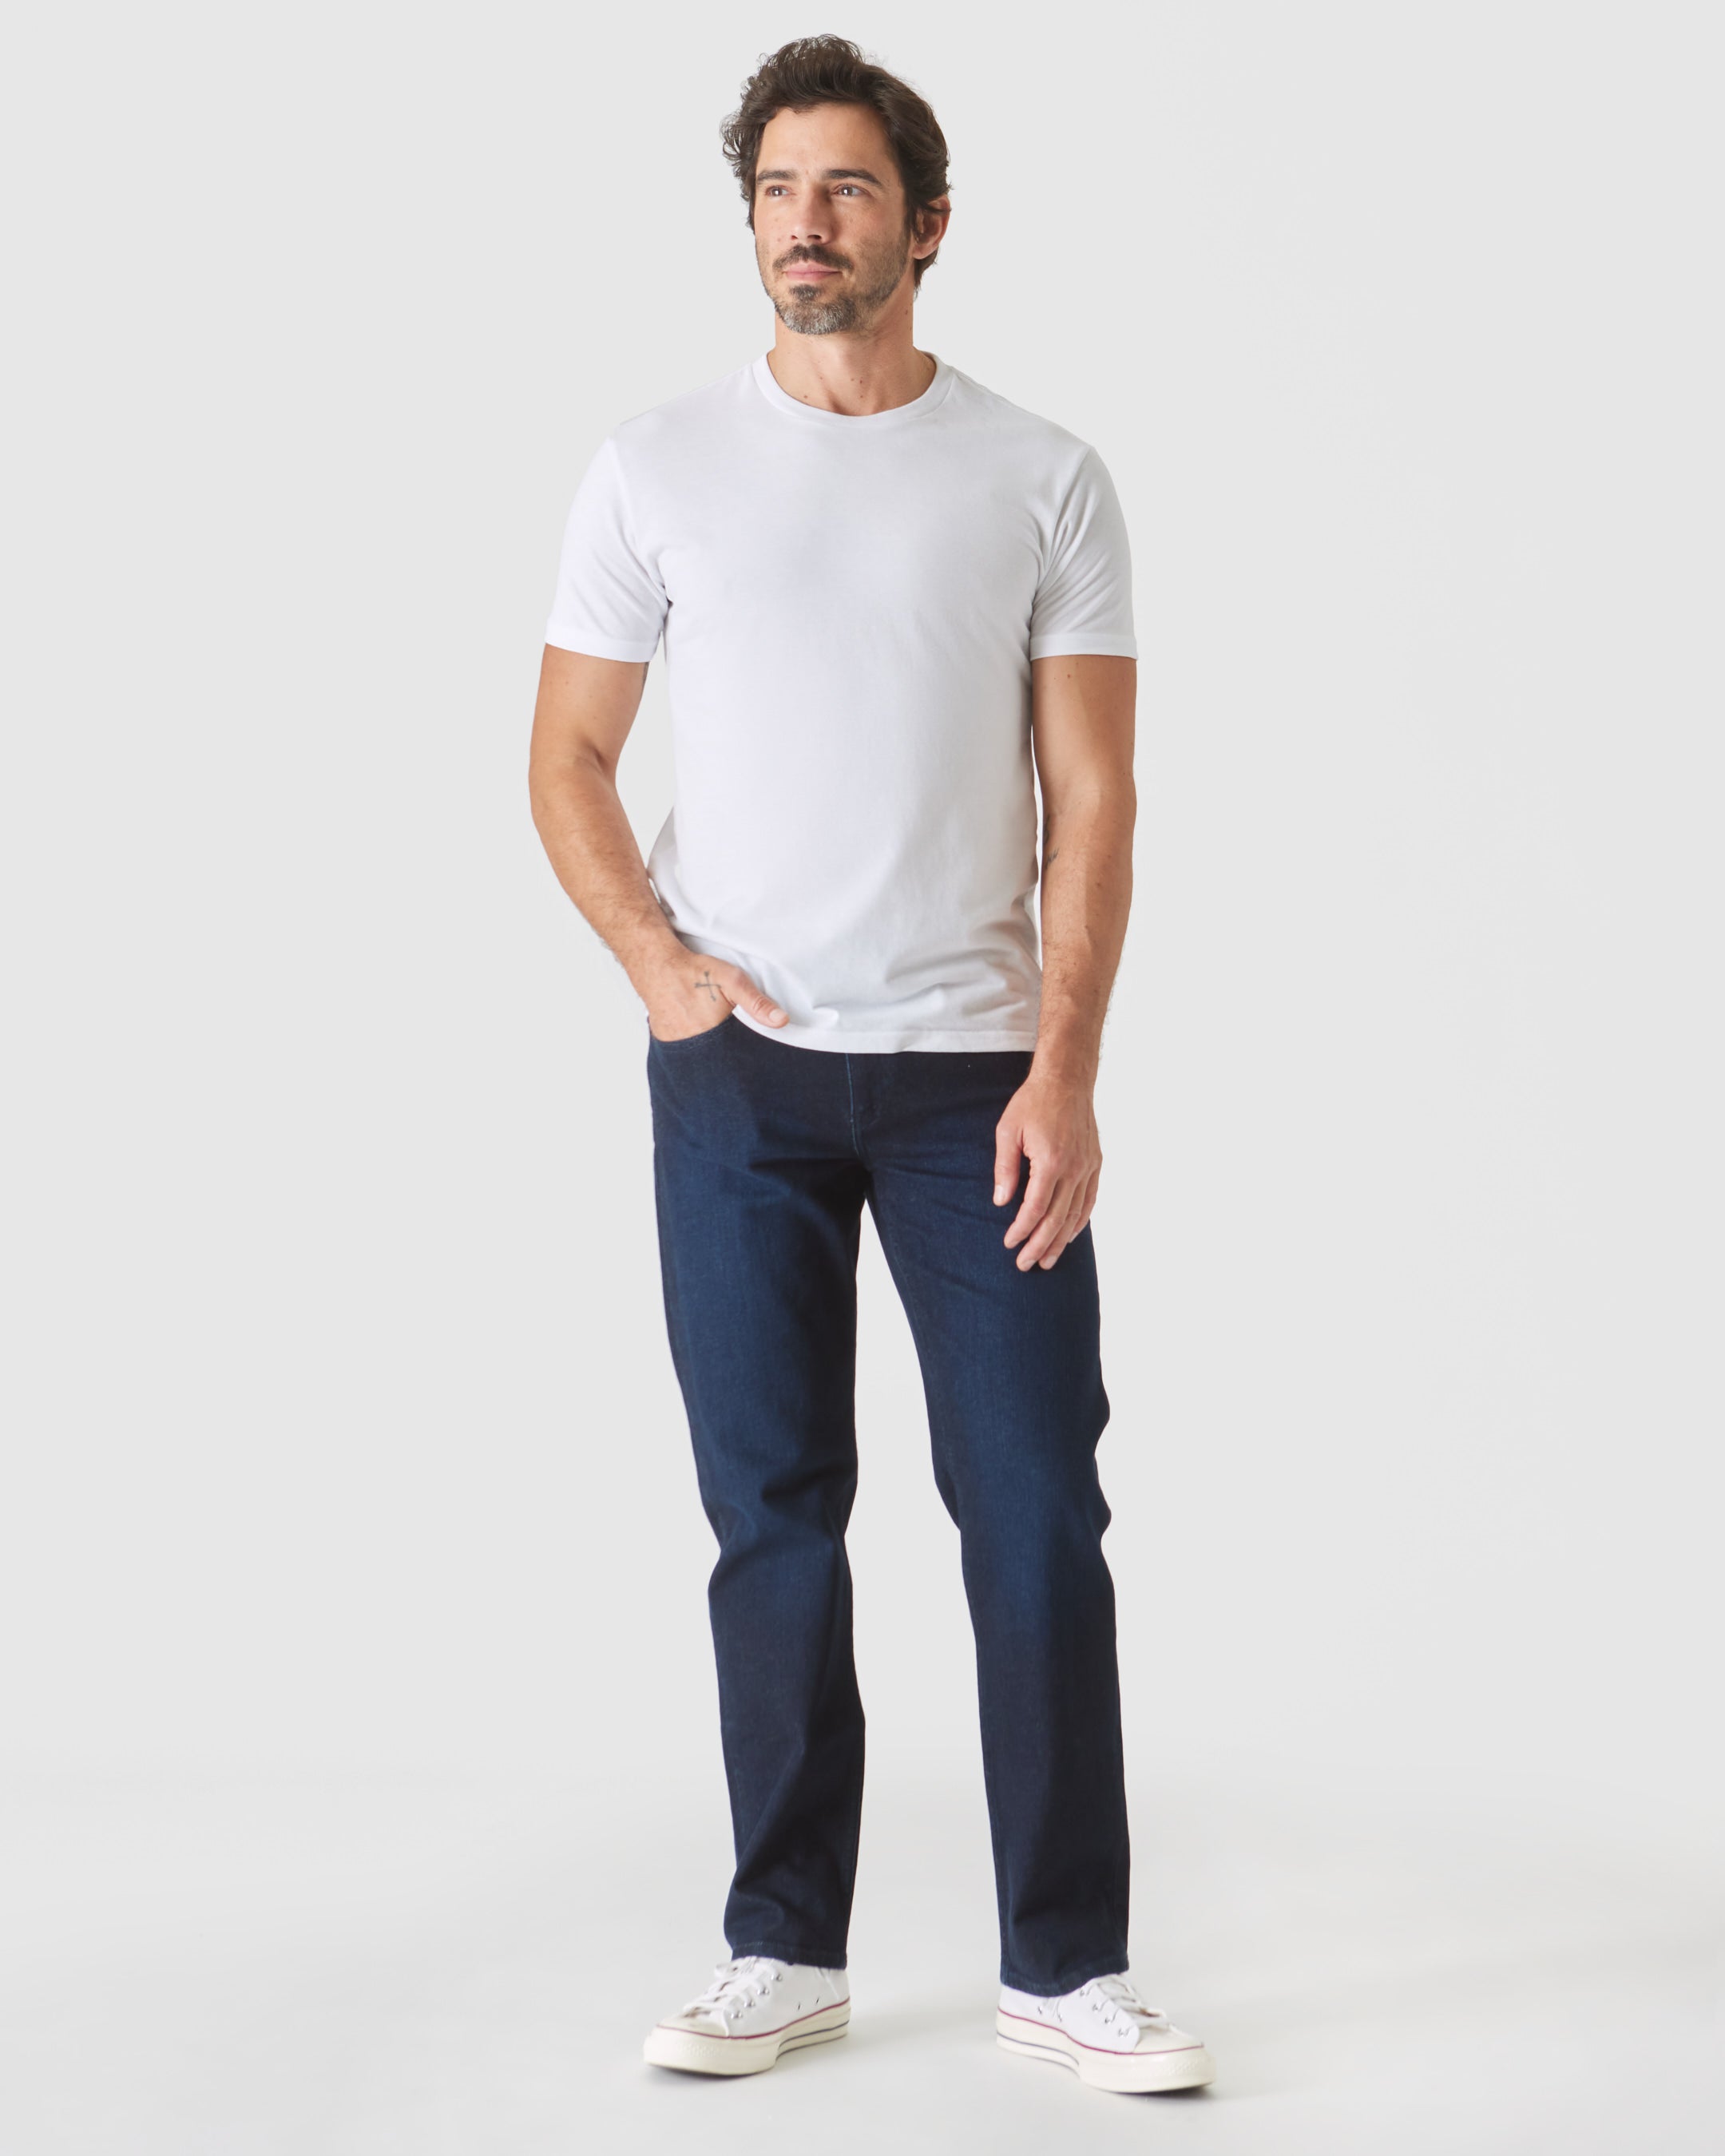 Staple Straight Authentic Jeans 3-Pack